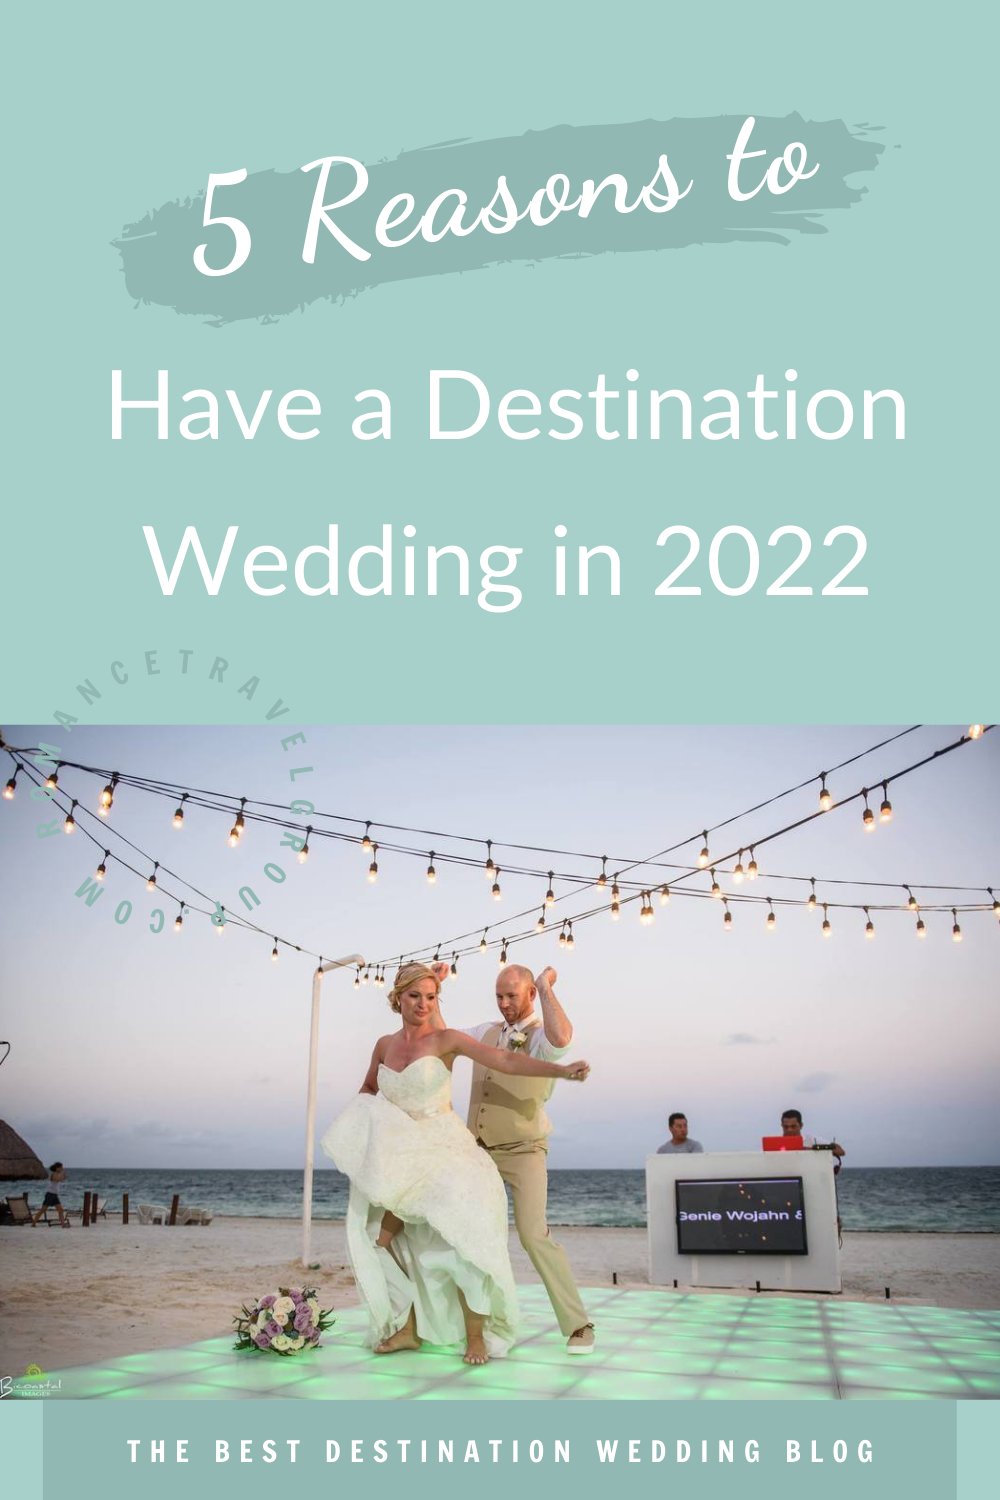 5 Reasons to Have a Destination Wedding in 2022